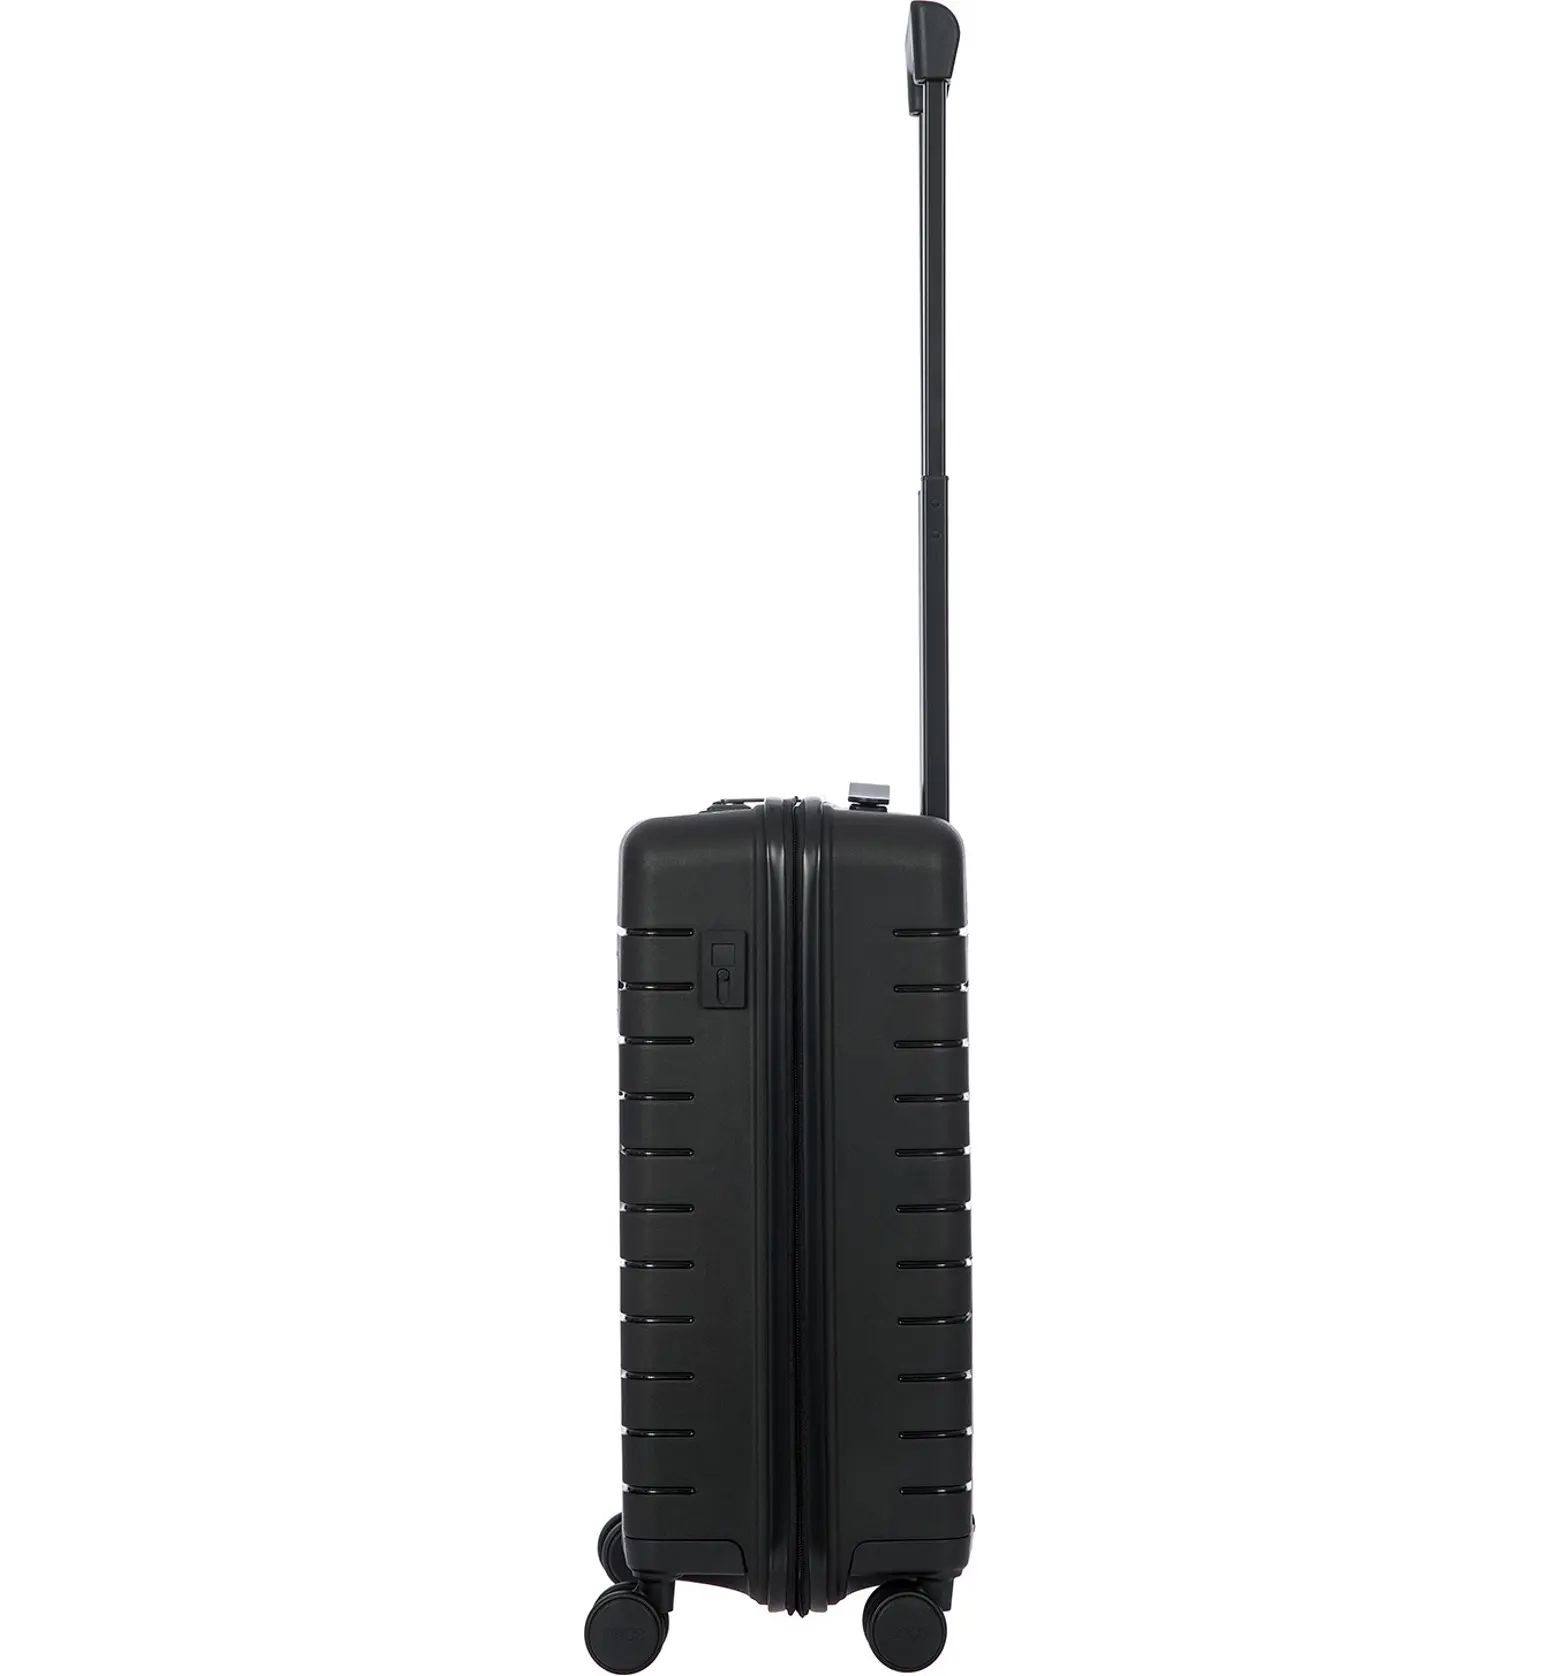 BY Ulisse 21" Expandable Carry-On Spinner | Nordstrom Rack